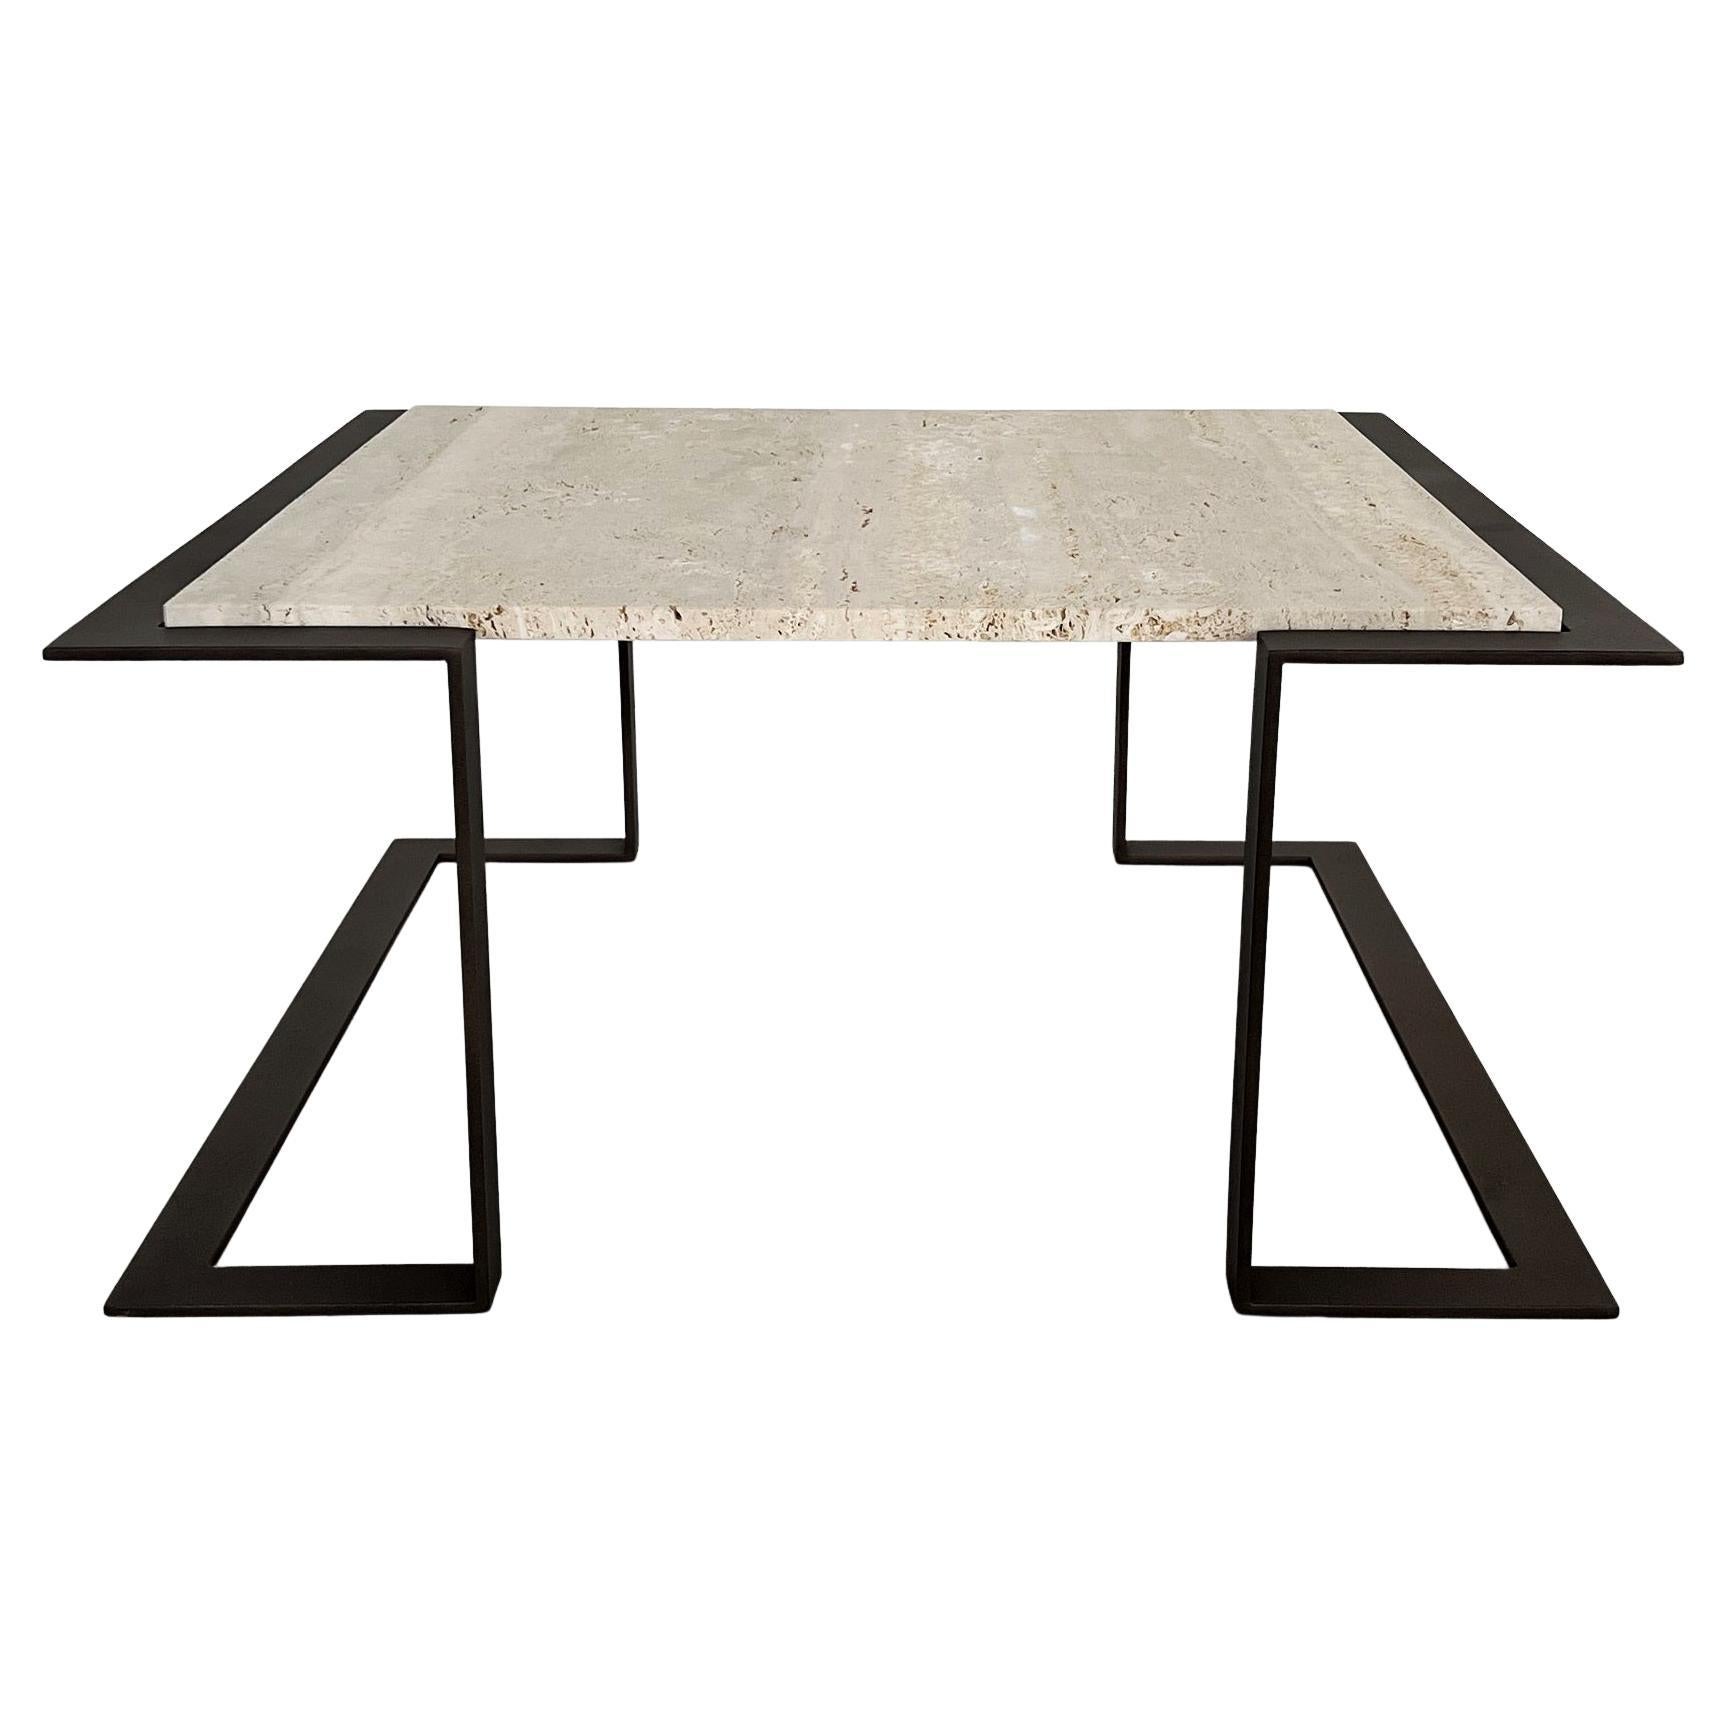 Gorgeous mid-century coffee or sofa table Made in Italy in the 1970s.
The table has a handmade wrought iron base that was sanded and painted with Corten lacquer (giving the iron a 